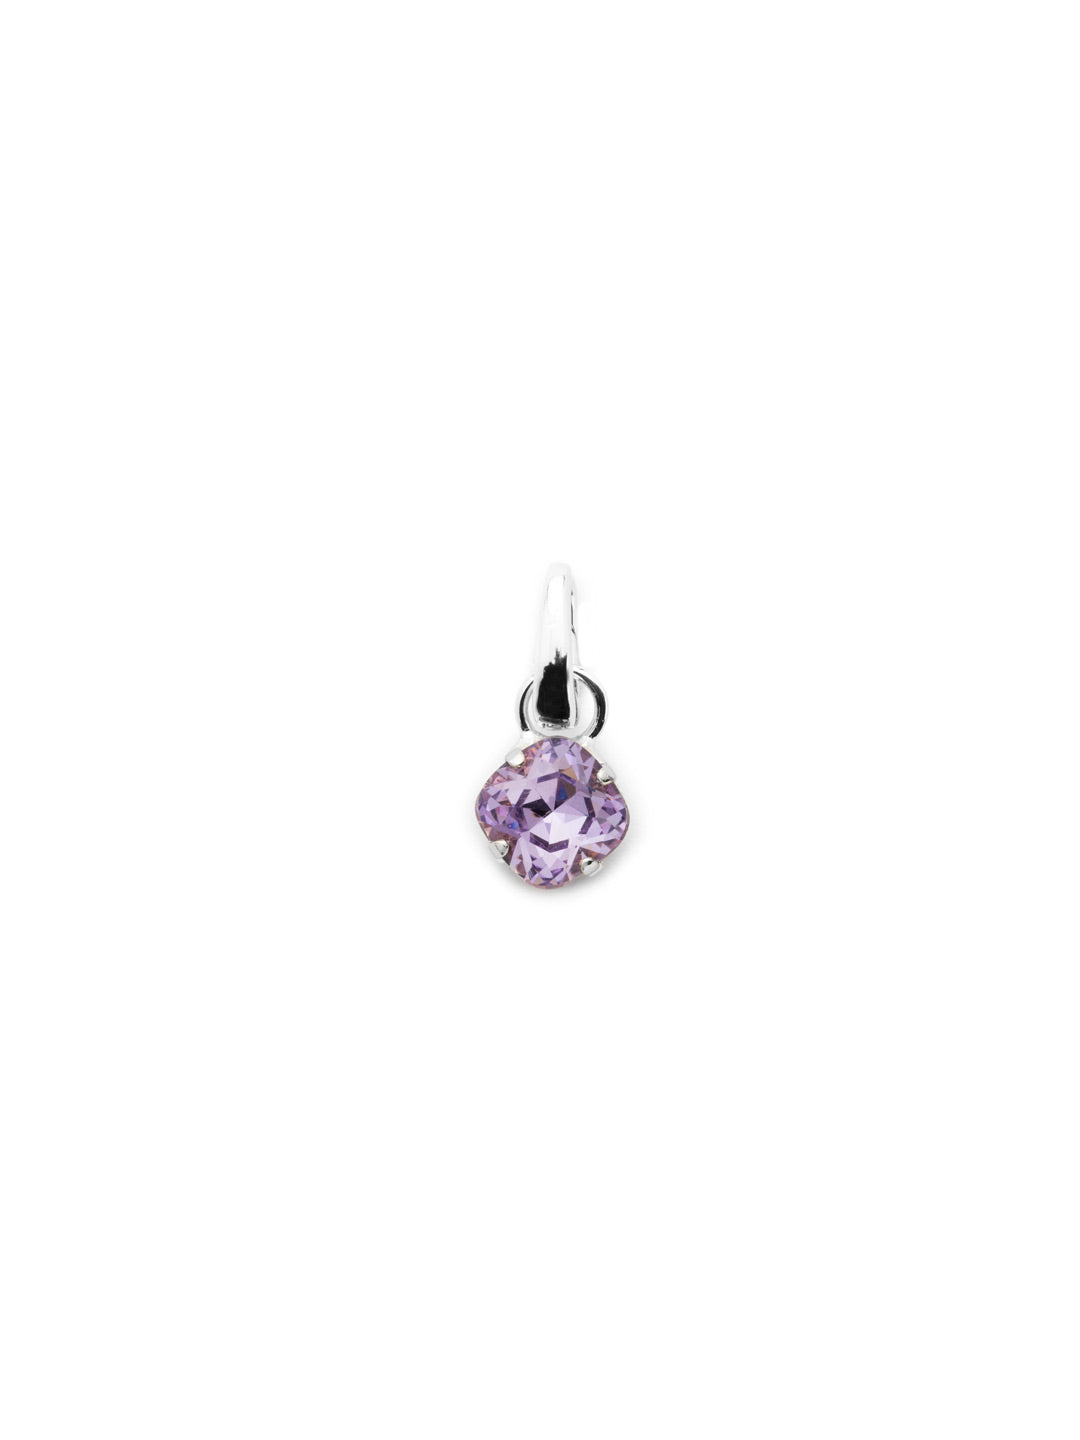 June Birthstone Violet Charm - CEU1RHVI - <p>A cushion-cut crystal designed in your beautiful birthstone. Simply attach it to our favorite chain for an everyday look. From Sorrelli's Violet collection in our Palladium Silver-tone finish.</p>